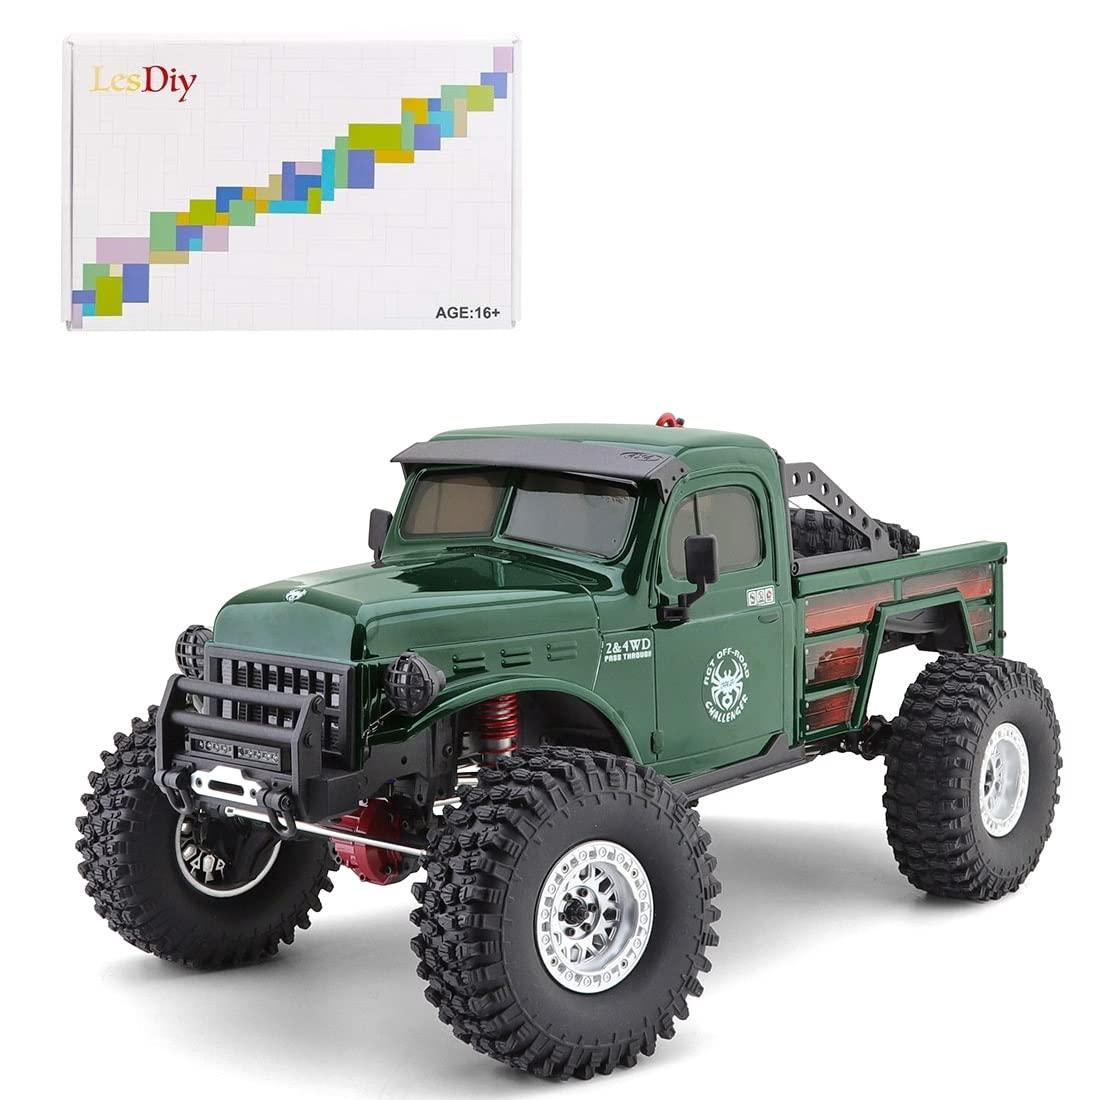 Rgt Crawler: Customize the RGT Crawler: A Popular Choice for Off-Road Enthusiasts 